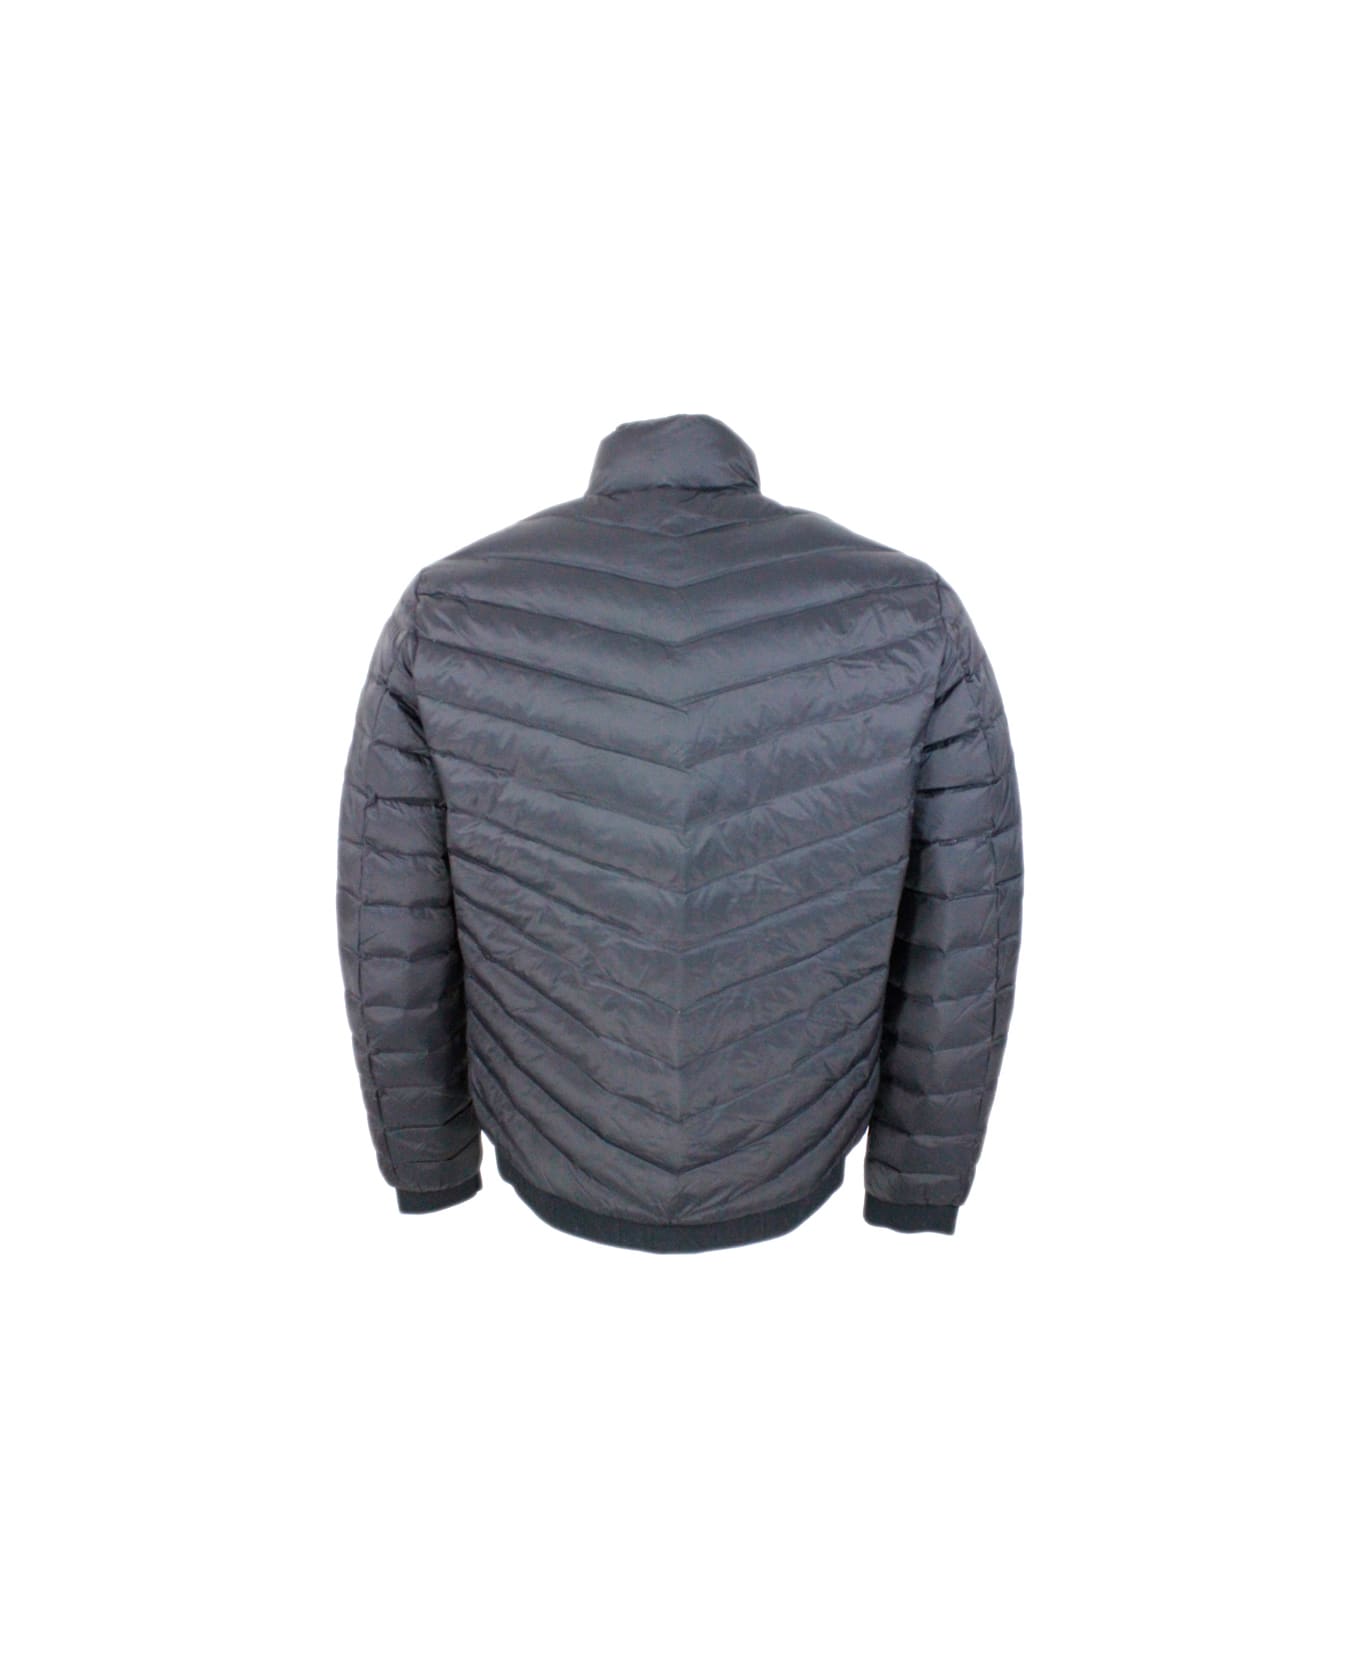 Armani Collezioni Light Down Jacket With Logoed And Elasticated Edges And Zip Closure - Grey Dark